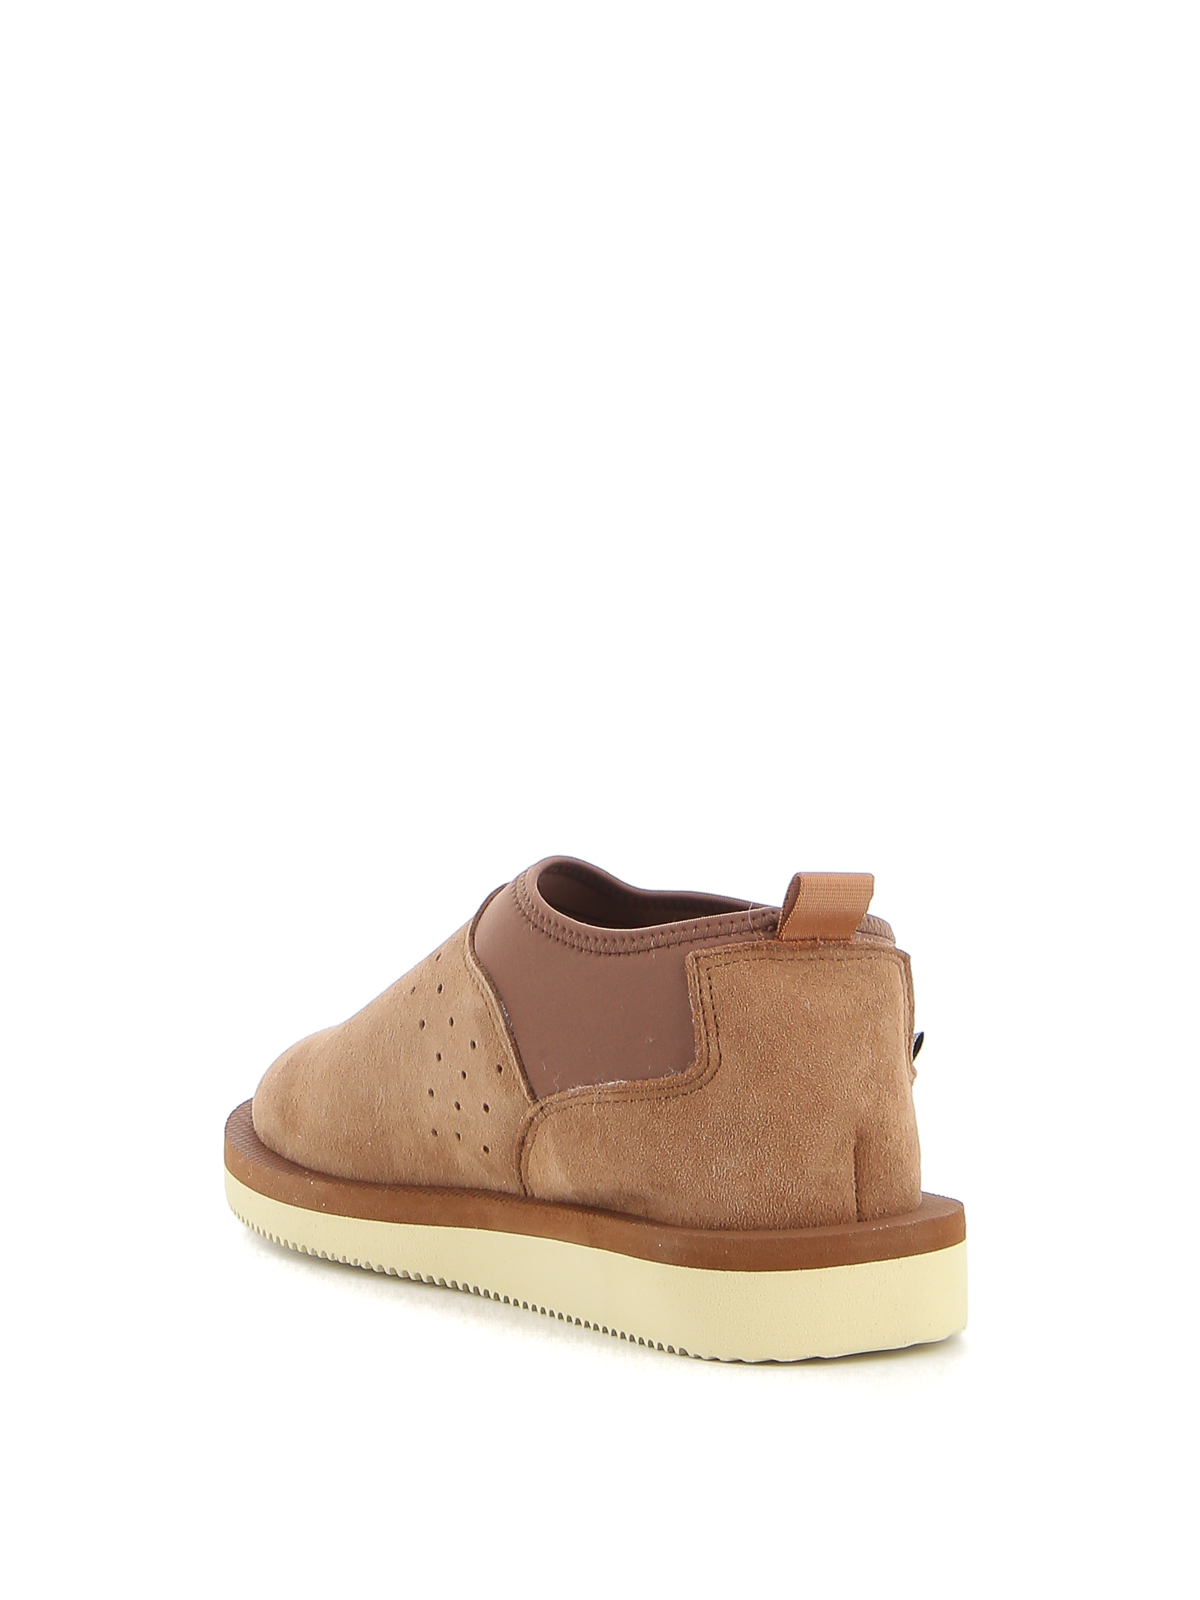 Trainers Suicoke - RON-M2ab-MID sneakers - OG073M2ABMIDBROWN